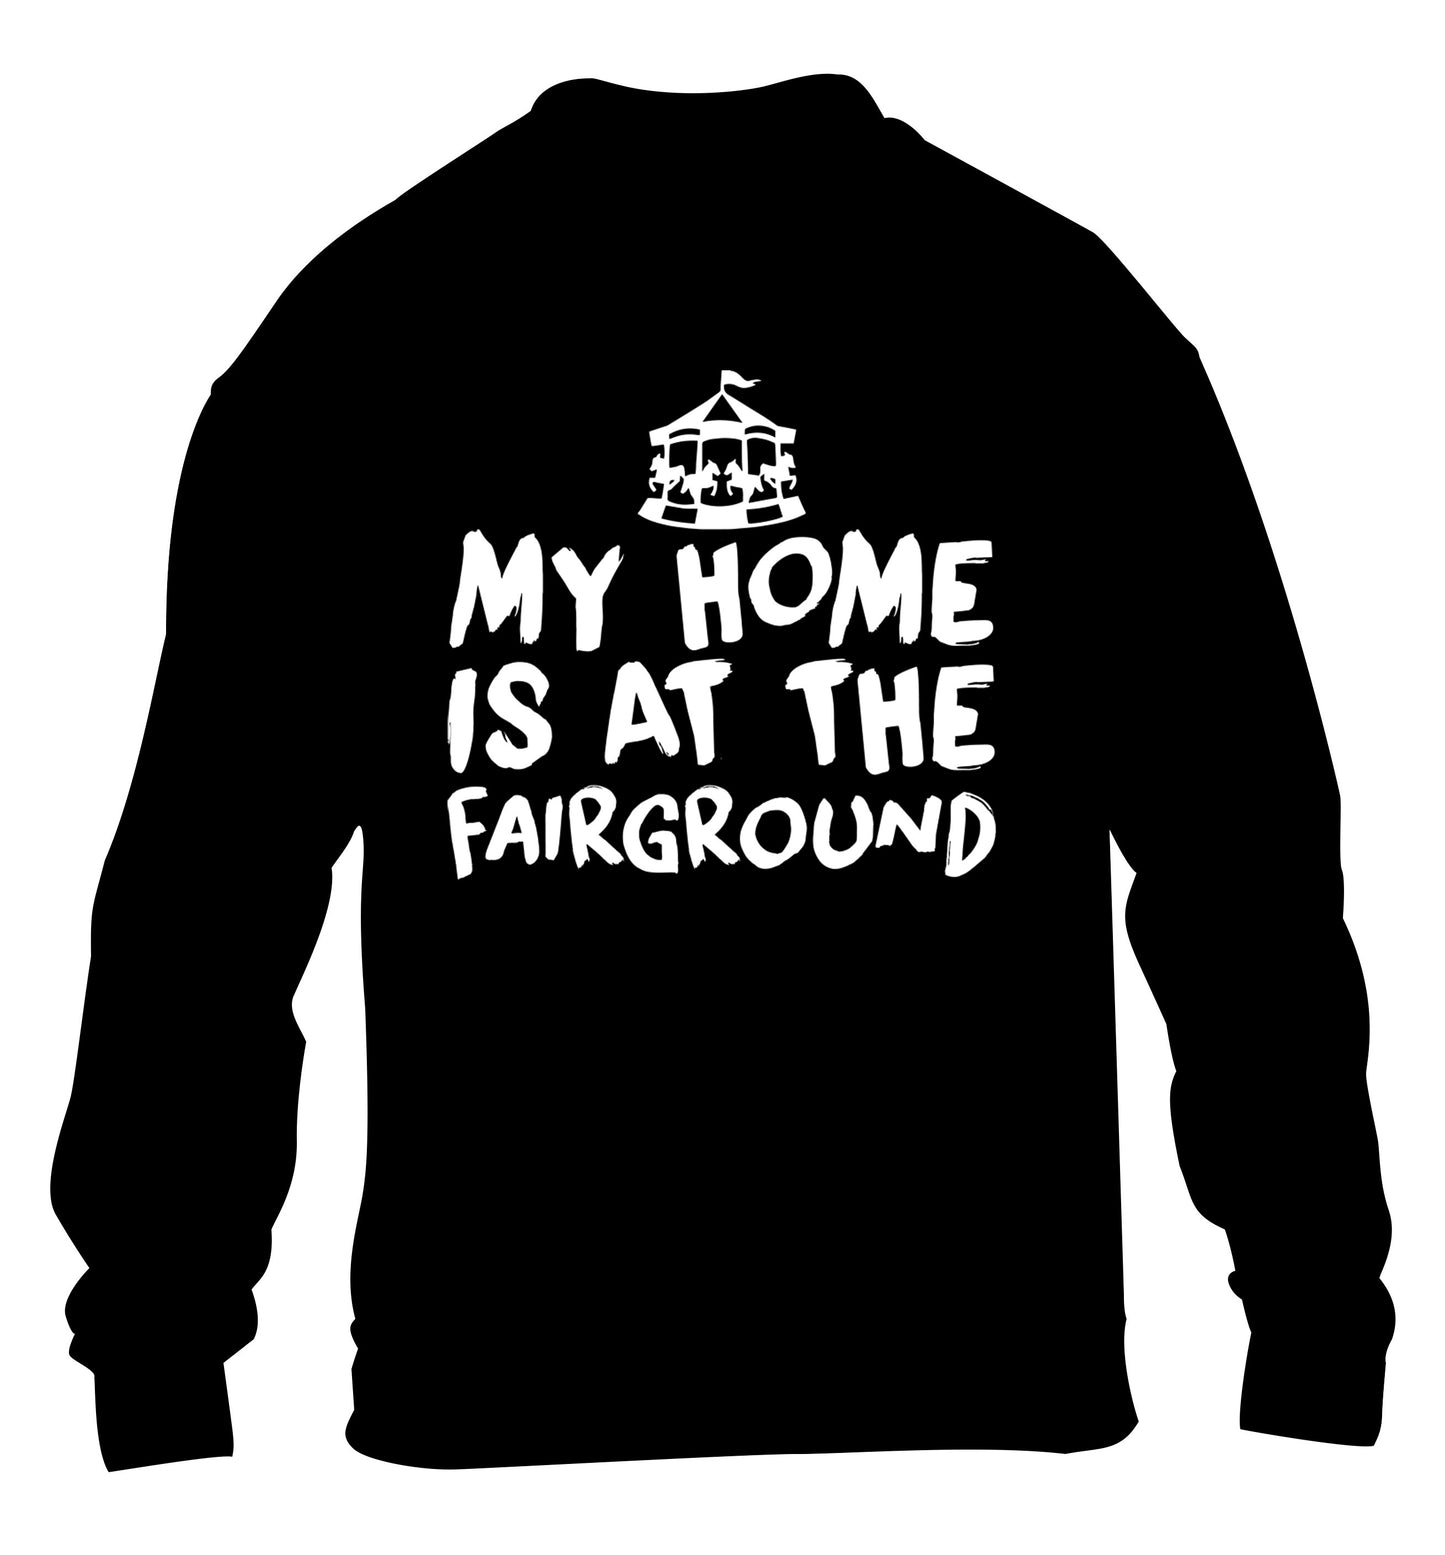 My home is at the fairground children's black sweater 12-14 Years